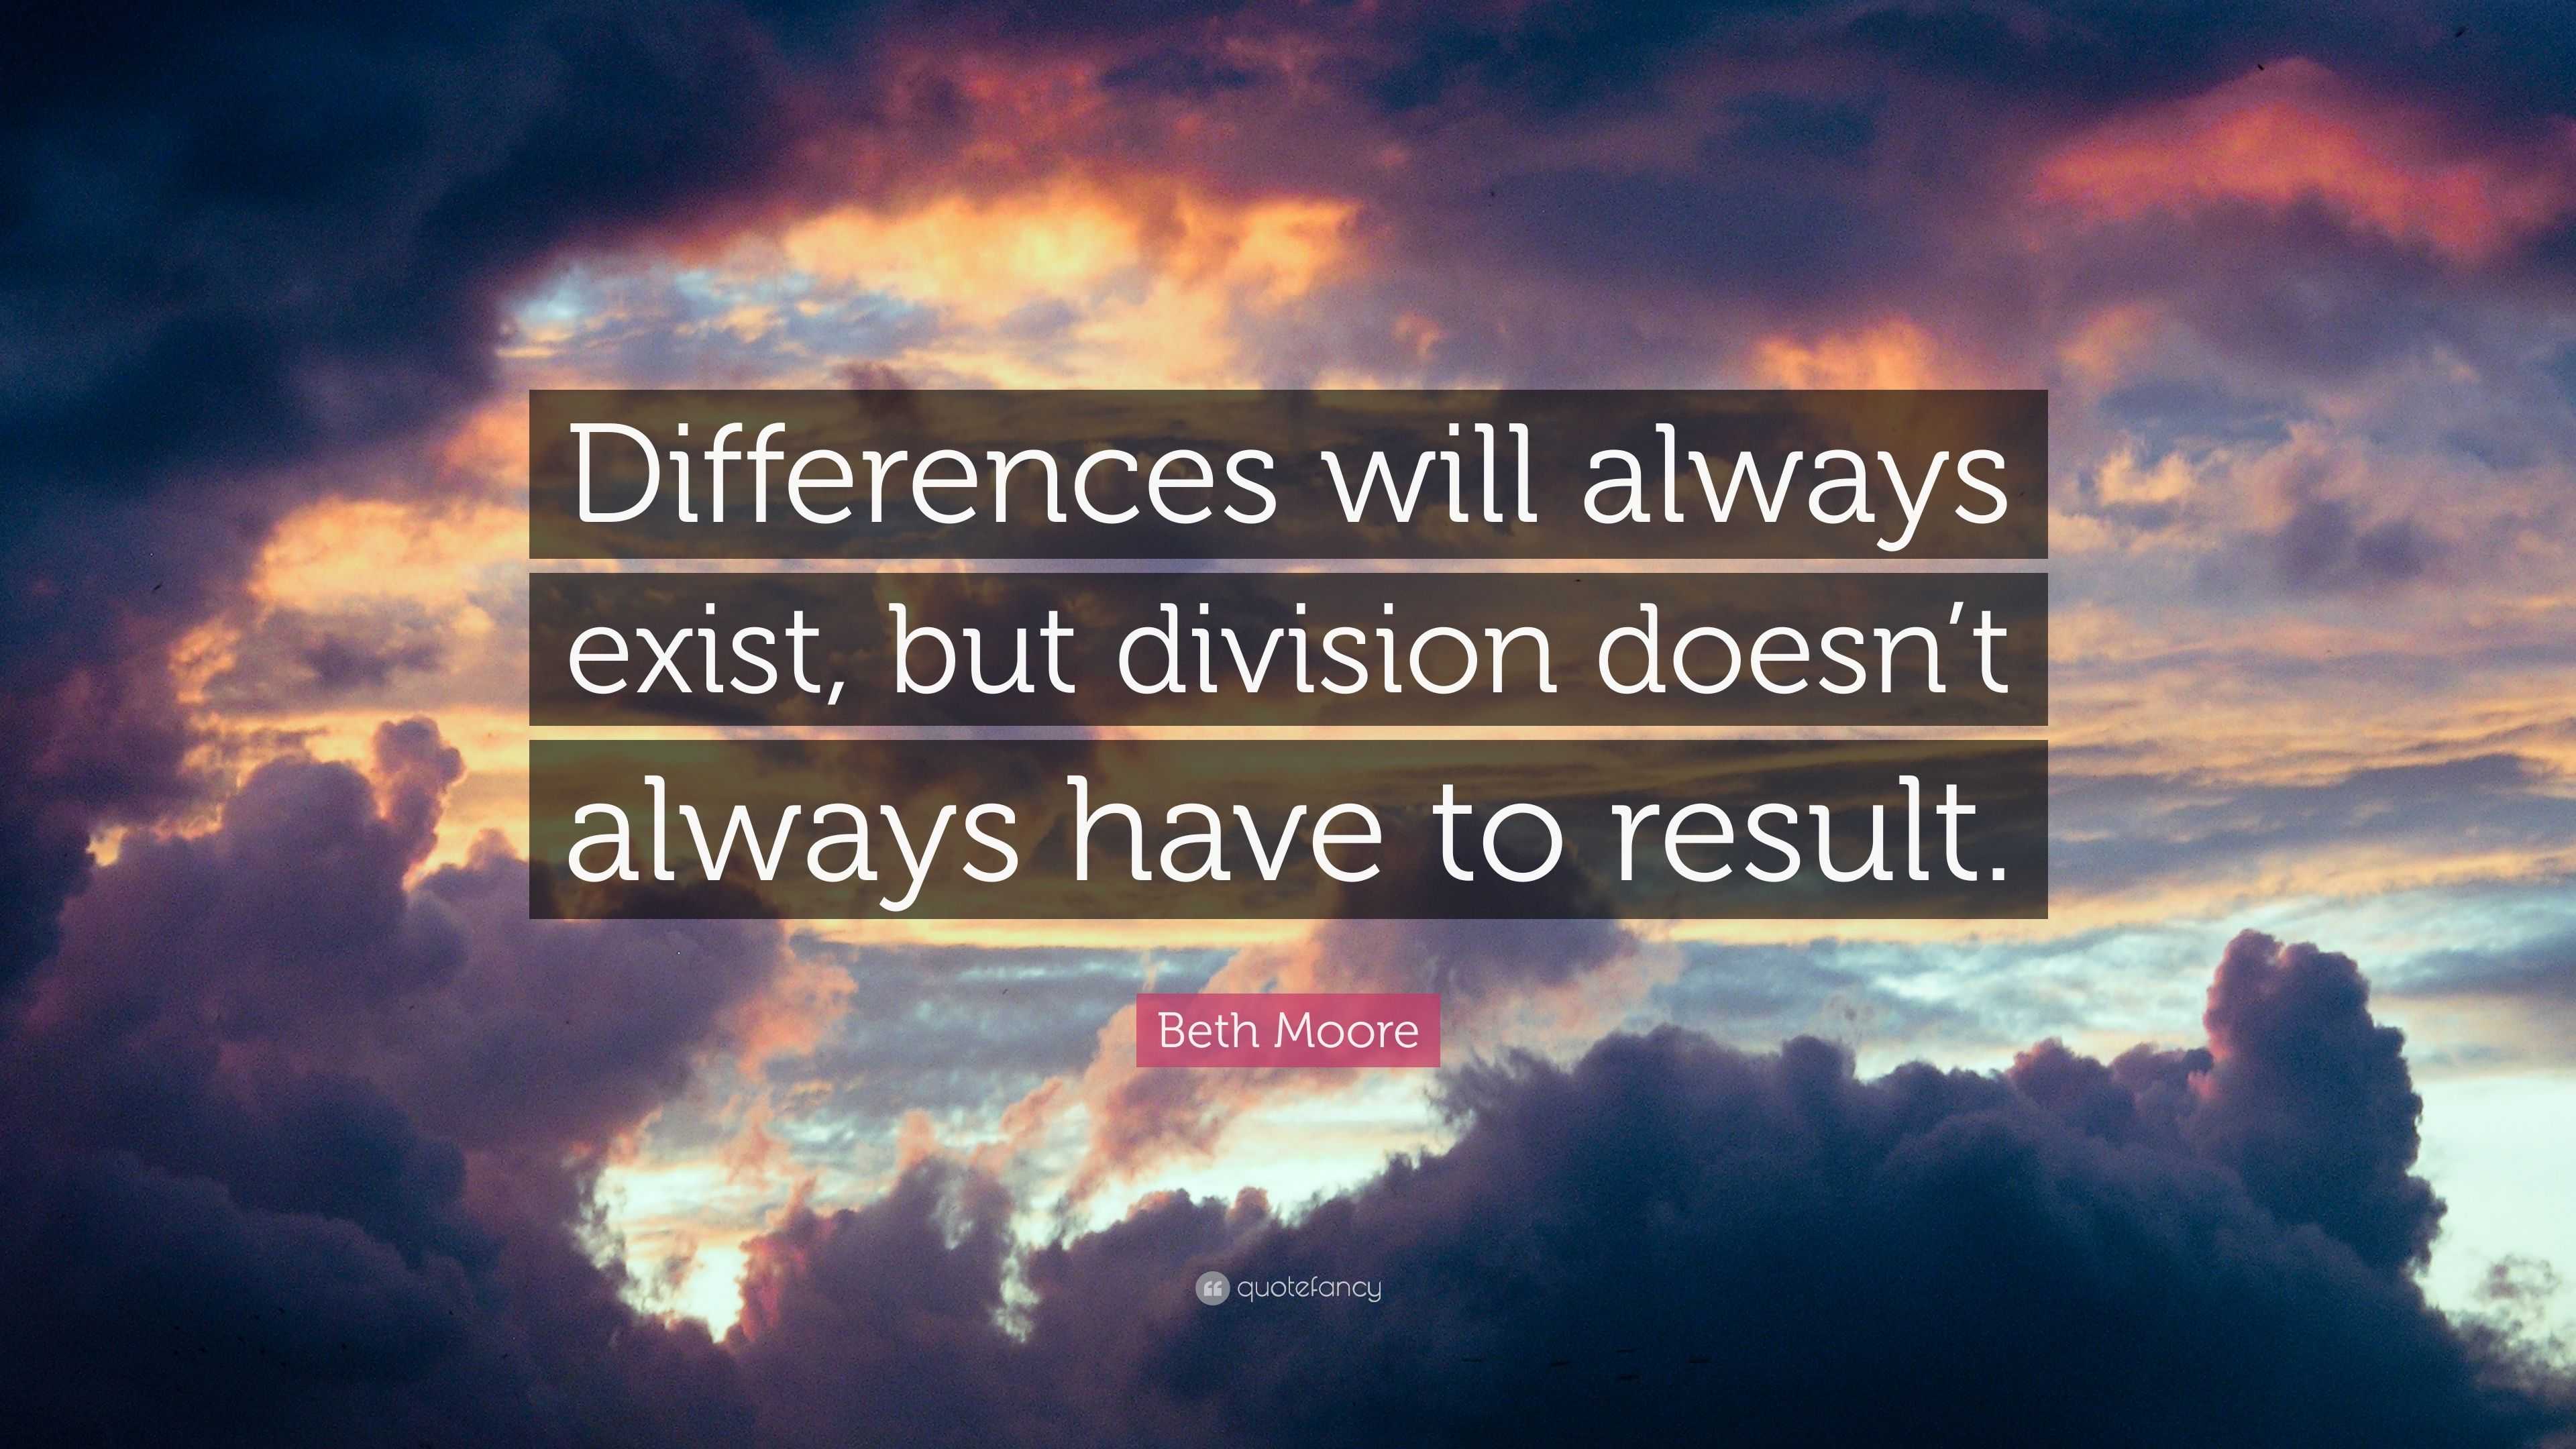 Beth Moore Quote: “Differences will always exist, but division doesn’t